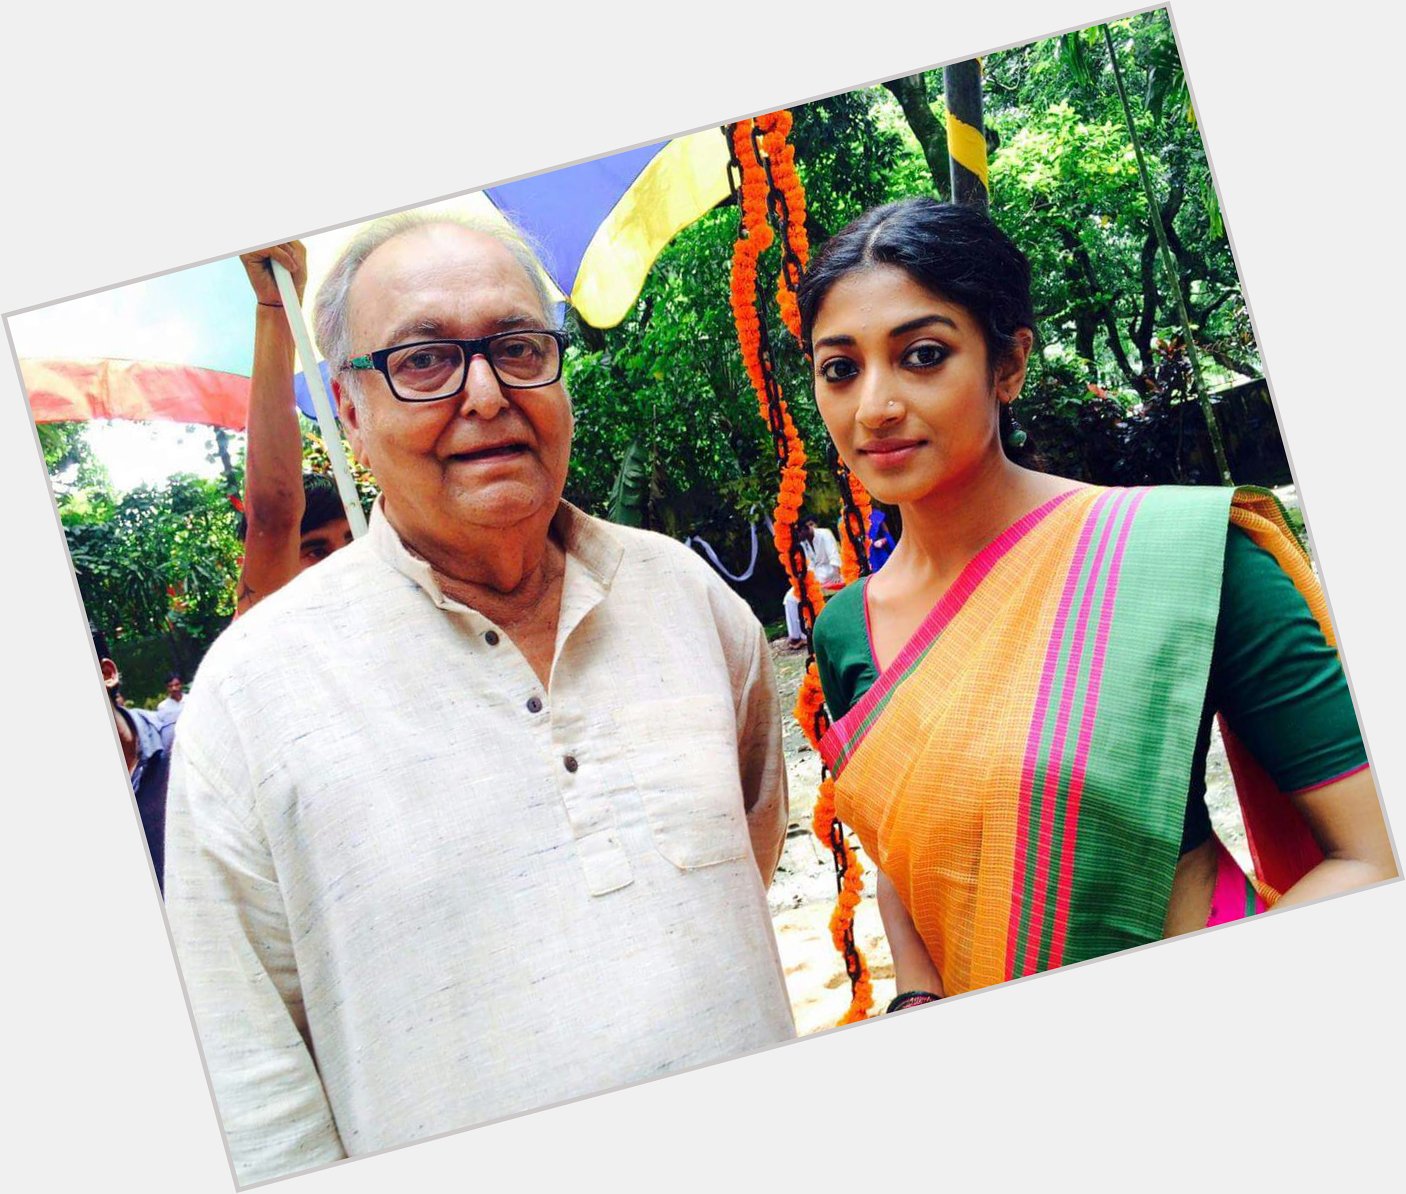 Feels Blessed to work with him...
Wishing the legend Soumitra Chatterjee a very Happy Birthday!! 